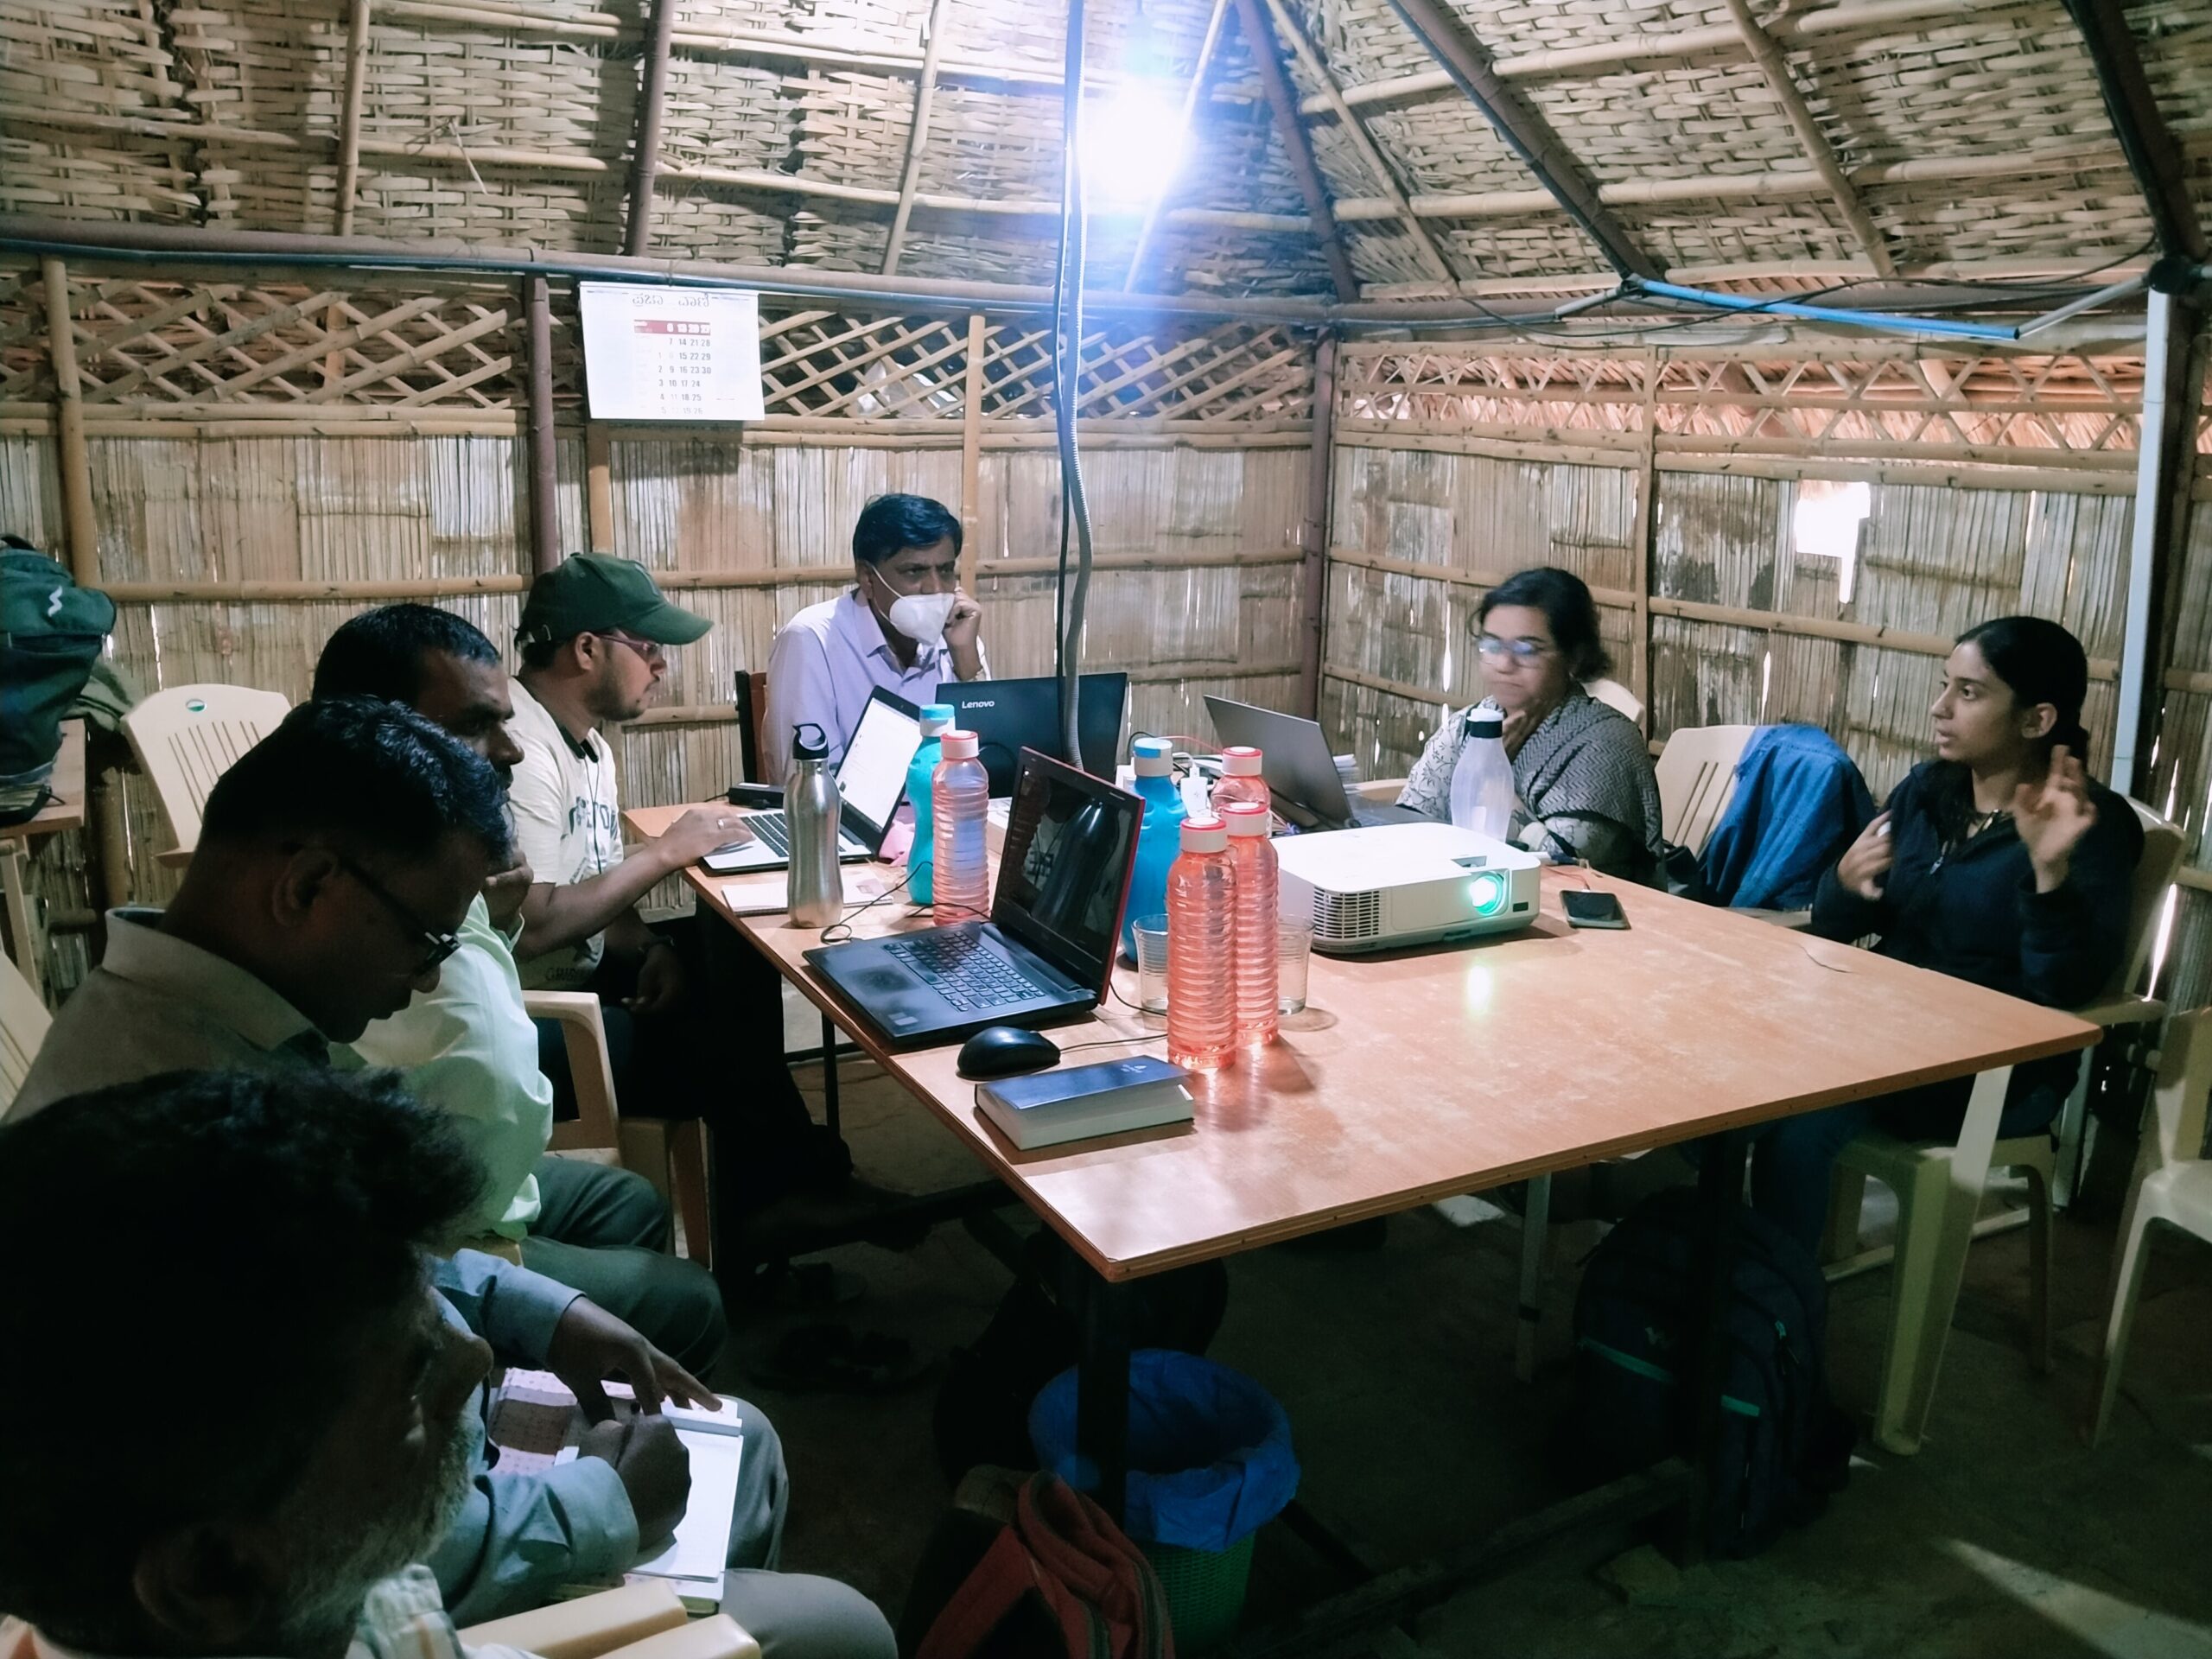 People sitting around a table in a hut, holding a discussion